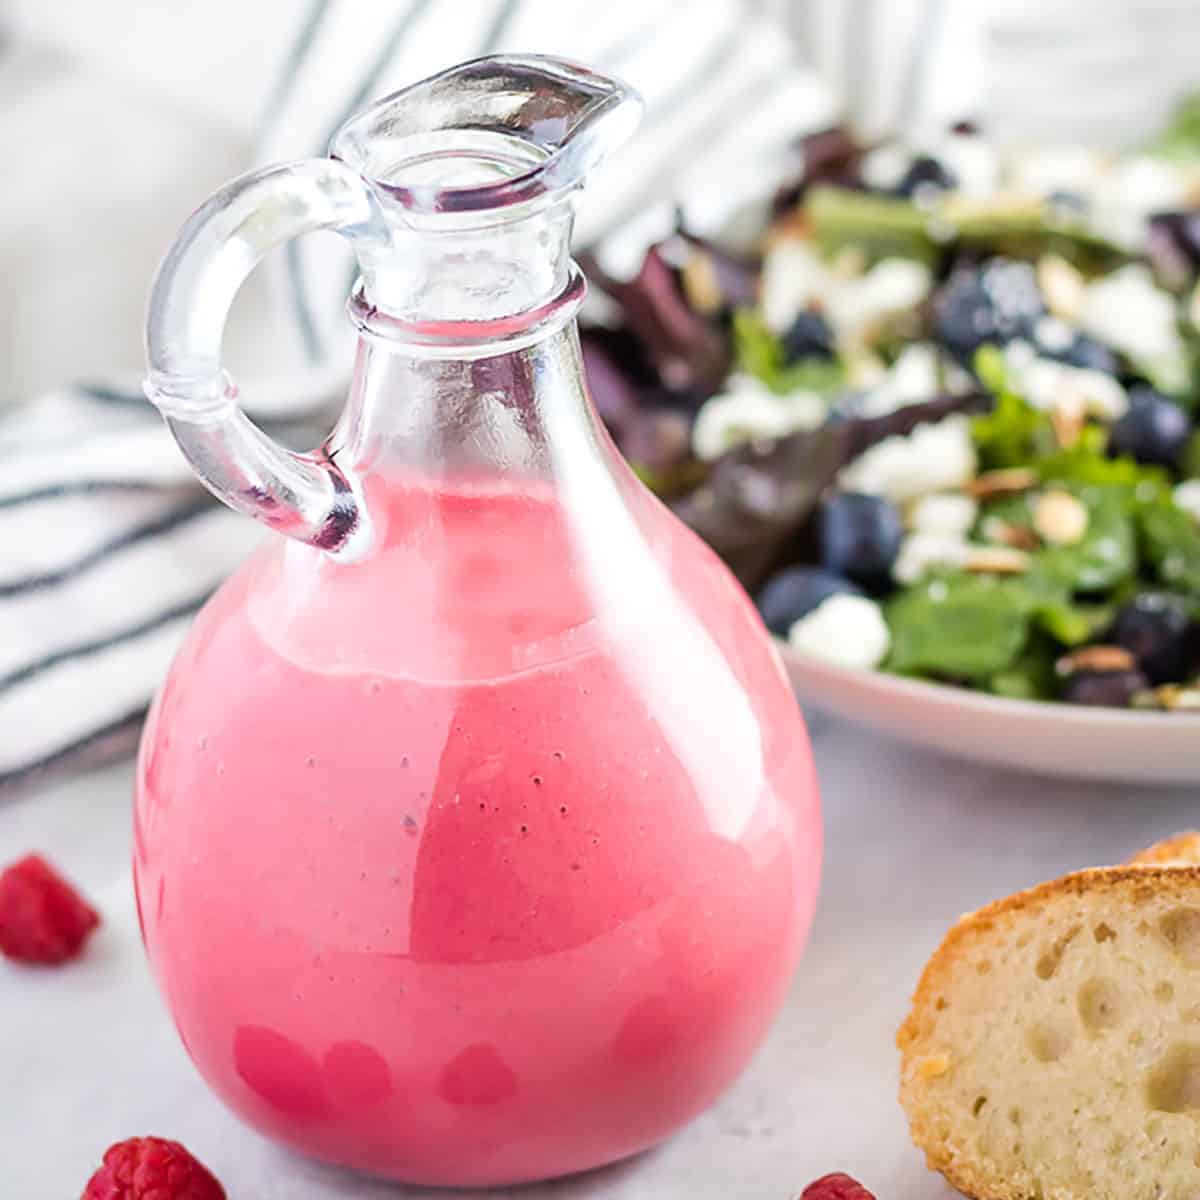 Raspberry vinaigrette in a jar with bread and a salad.